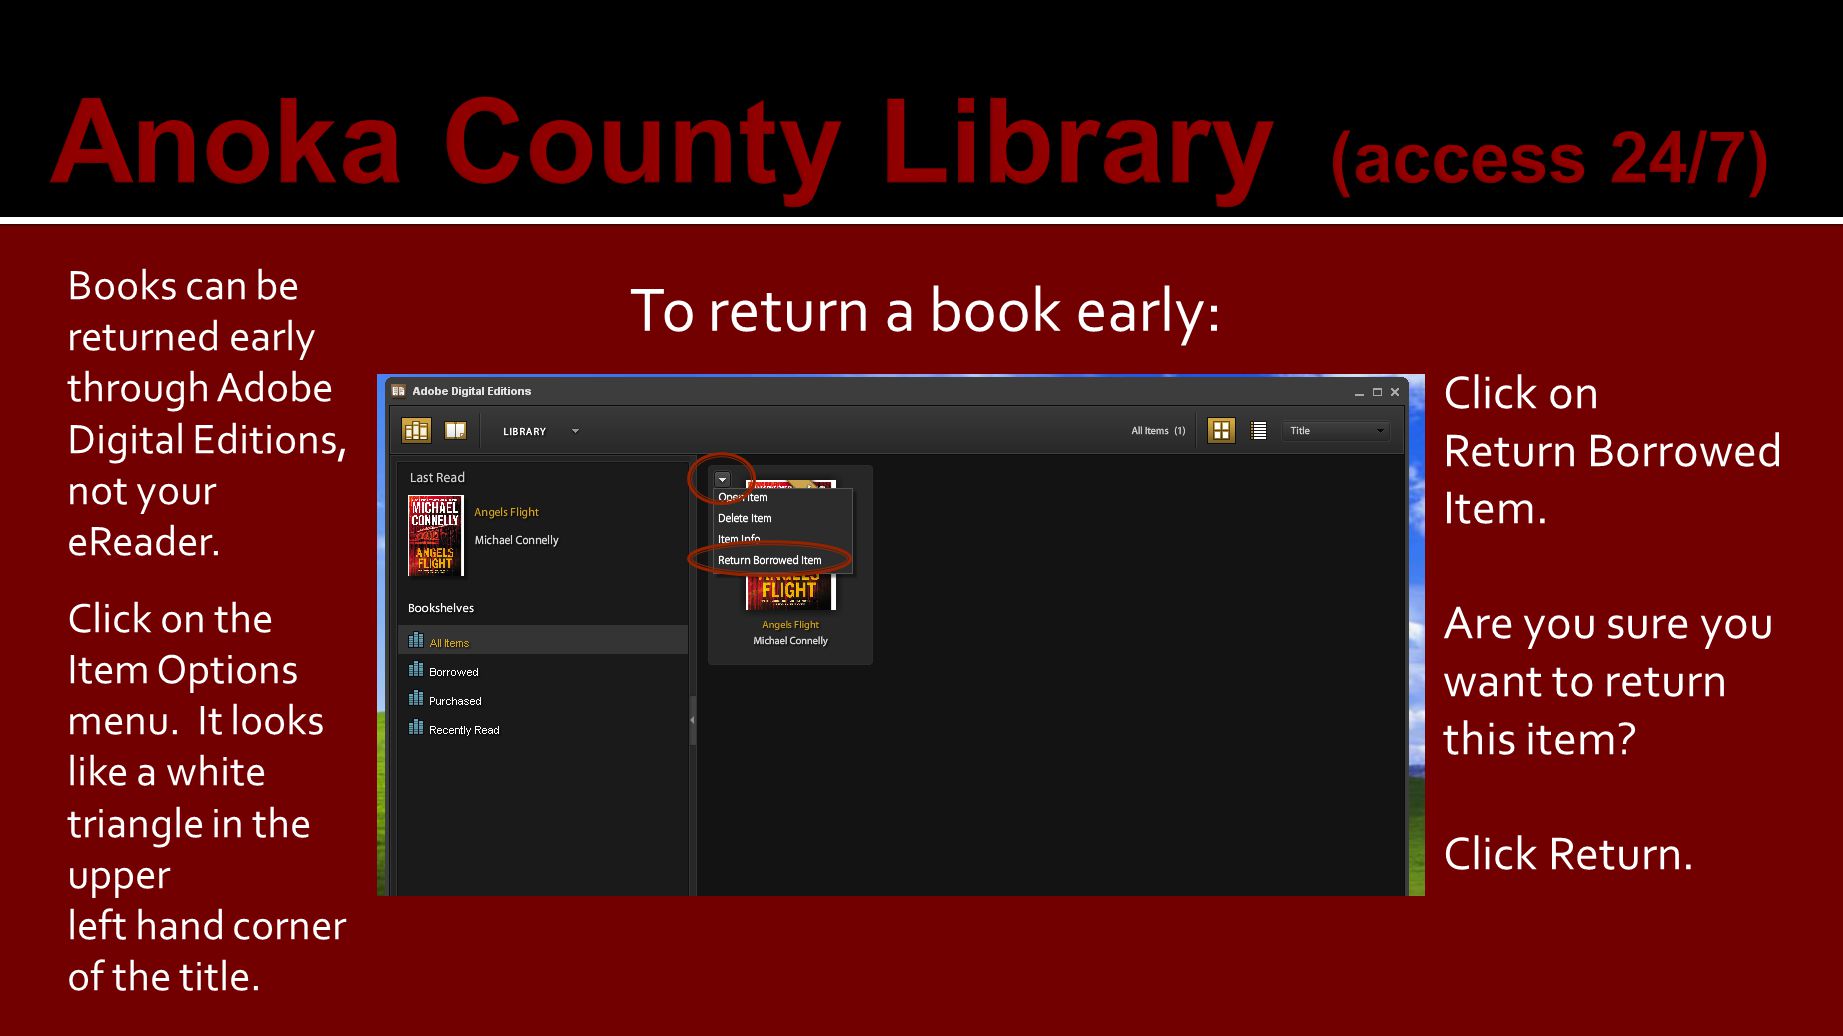 Anoka County Library (access 24/7) To return a book early: Books can be returned early through Adobe Digital Editions, not your eReader.